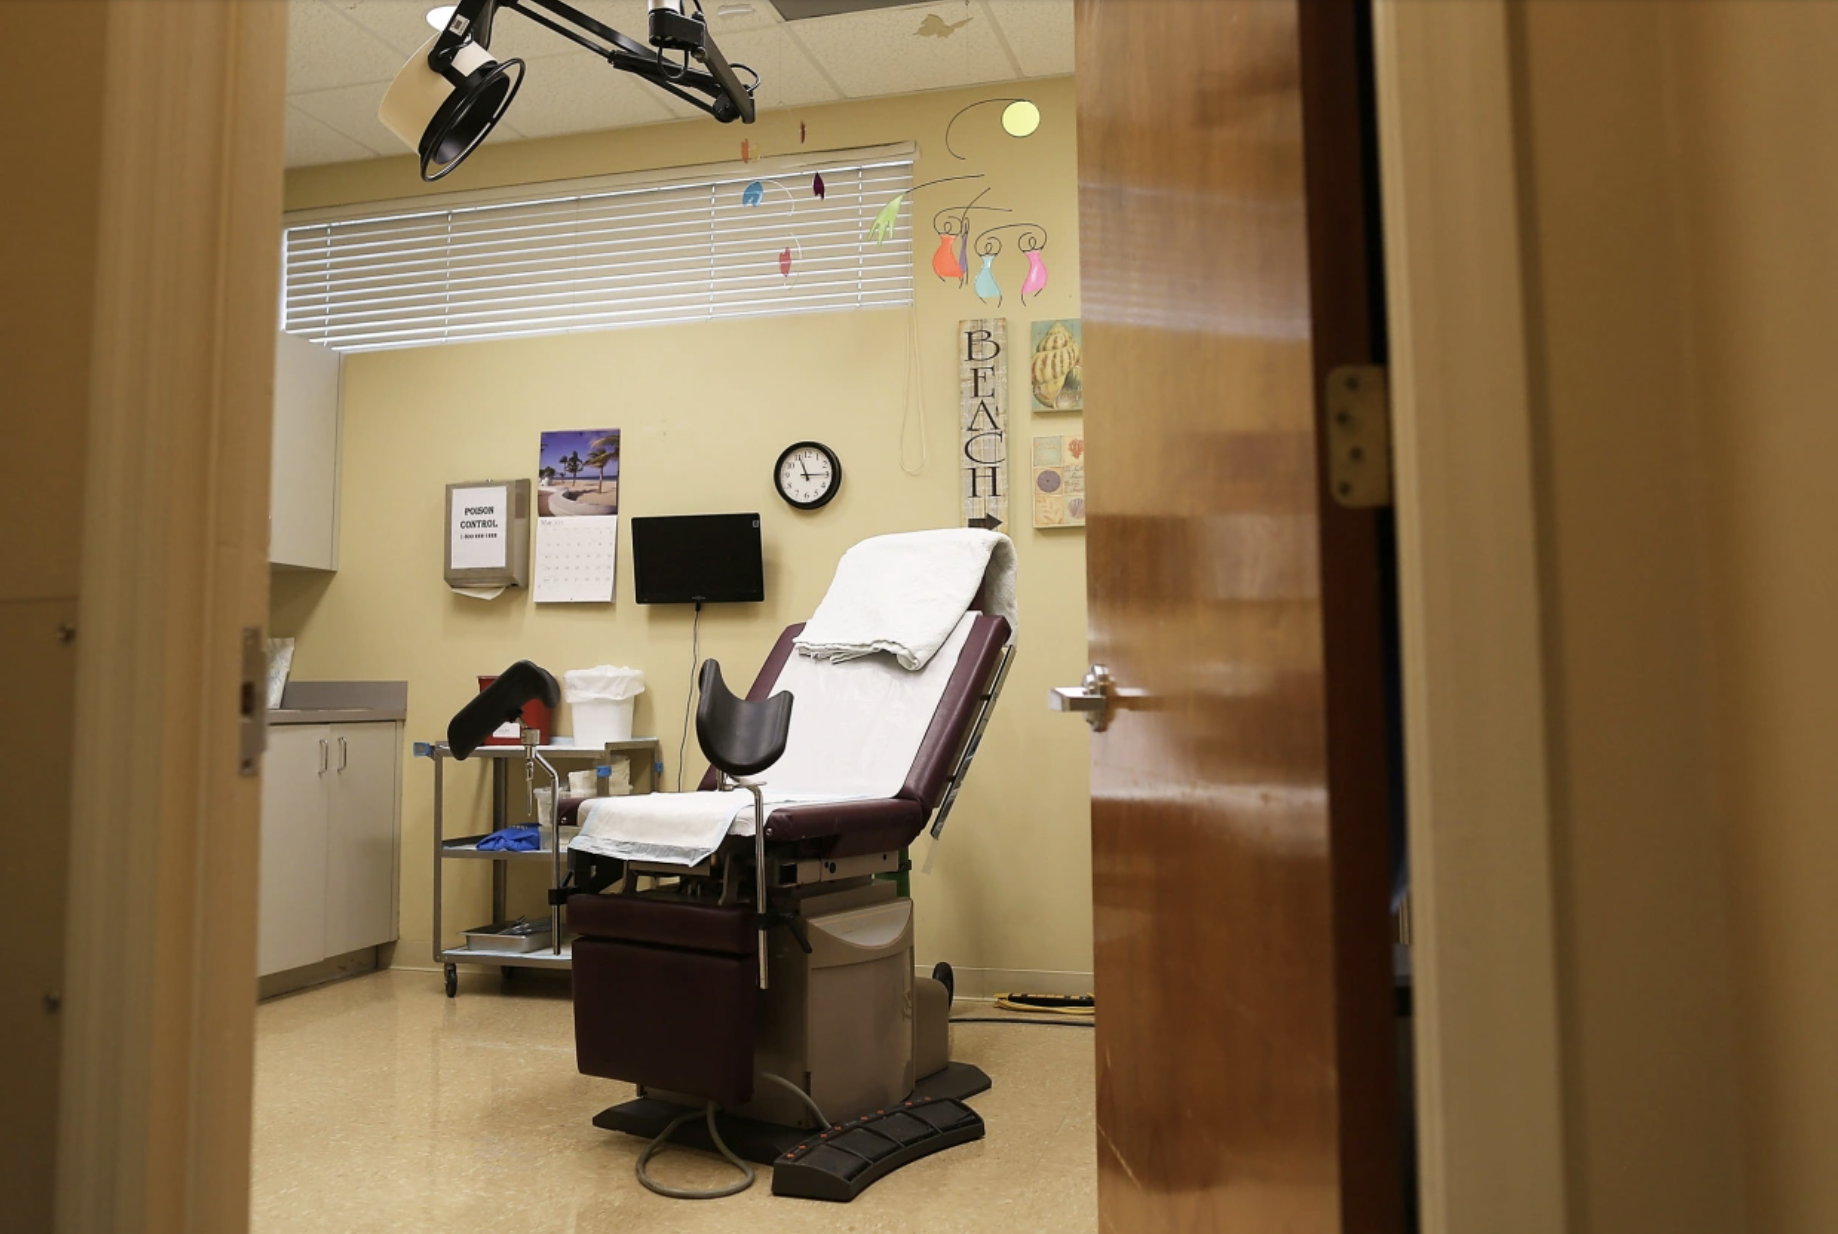 An examination room at a women's reproductive health center that provides abortions in Florida in May 2015. A bill Florida Gov. Ron DeSantis signed to ban abortions after 15 weeks of pregnancy will go into effect in July, barring a successful legal challenge.Joe Raedle / Getty Images file